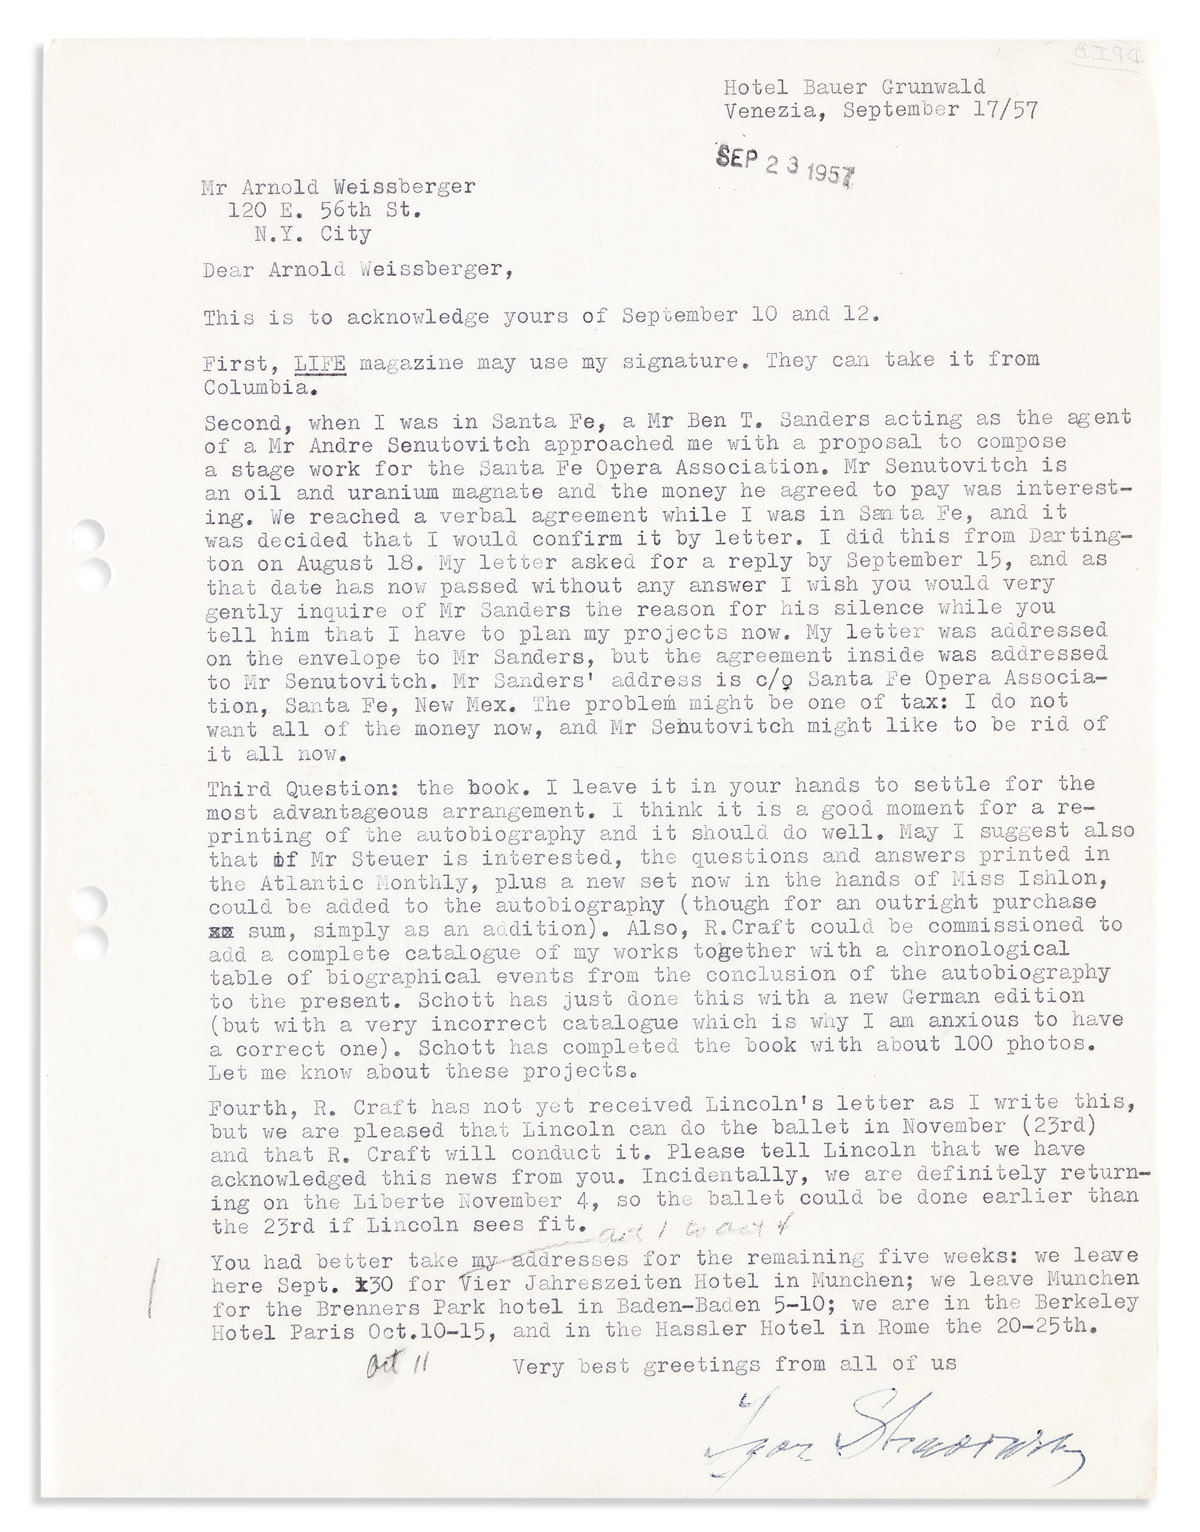 STRAVINSKY, IGOR. Typed Letter Signed, to Arnold Weissberger,